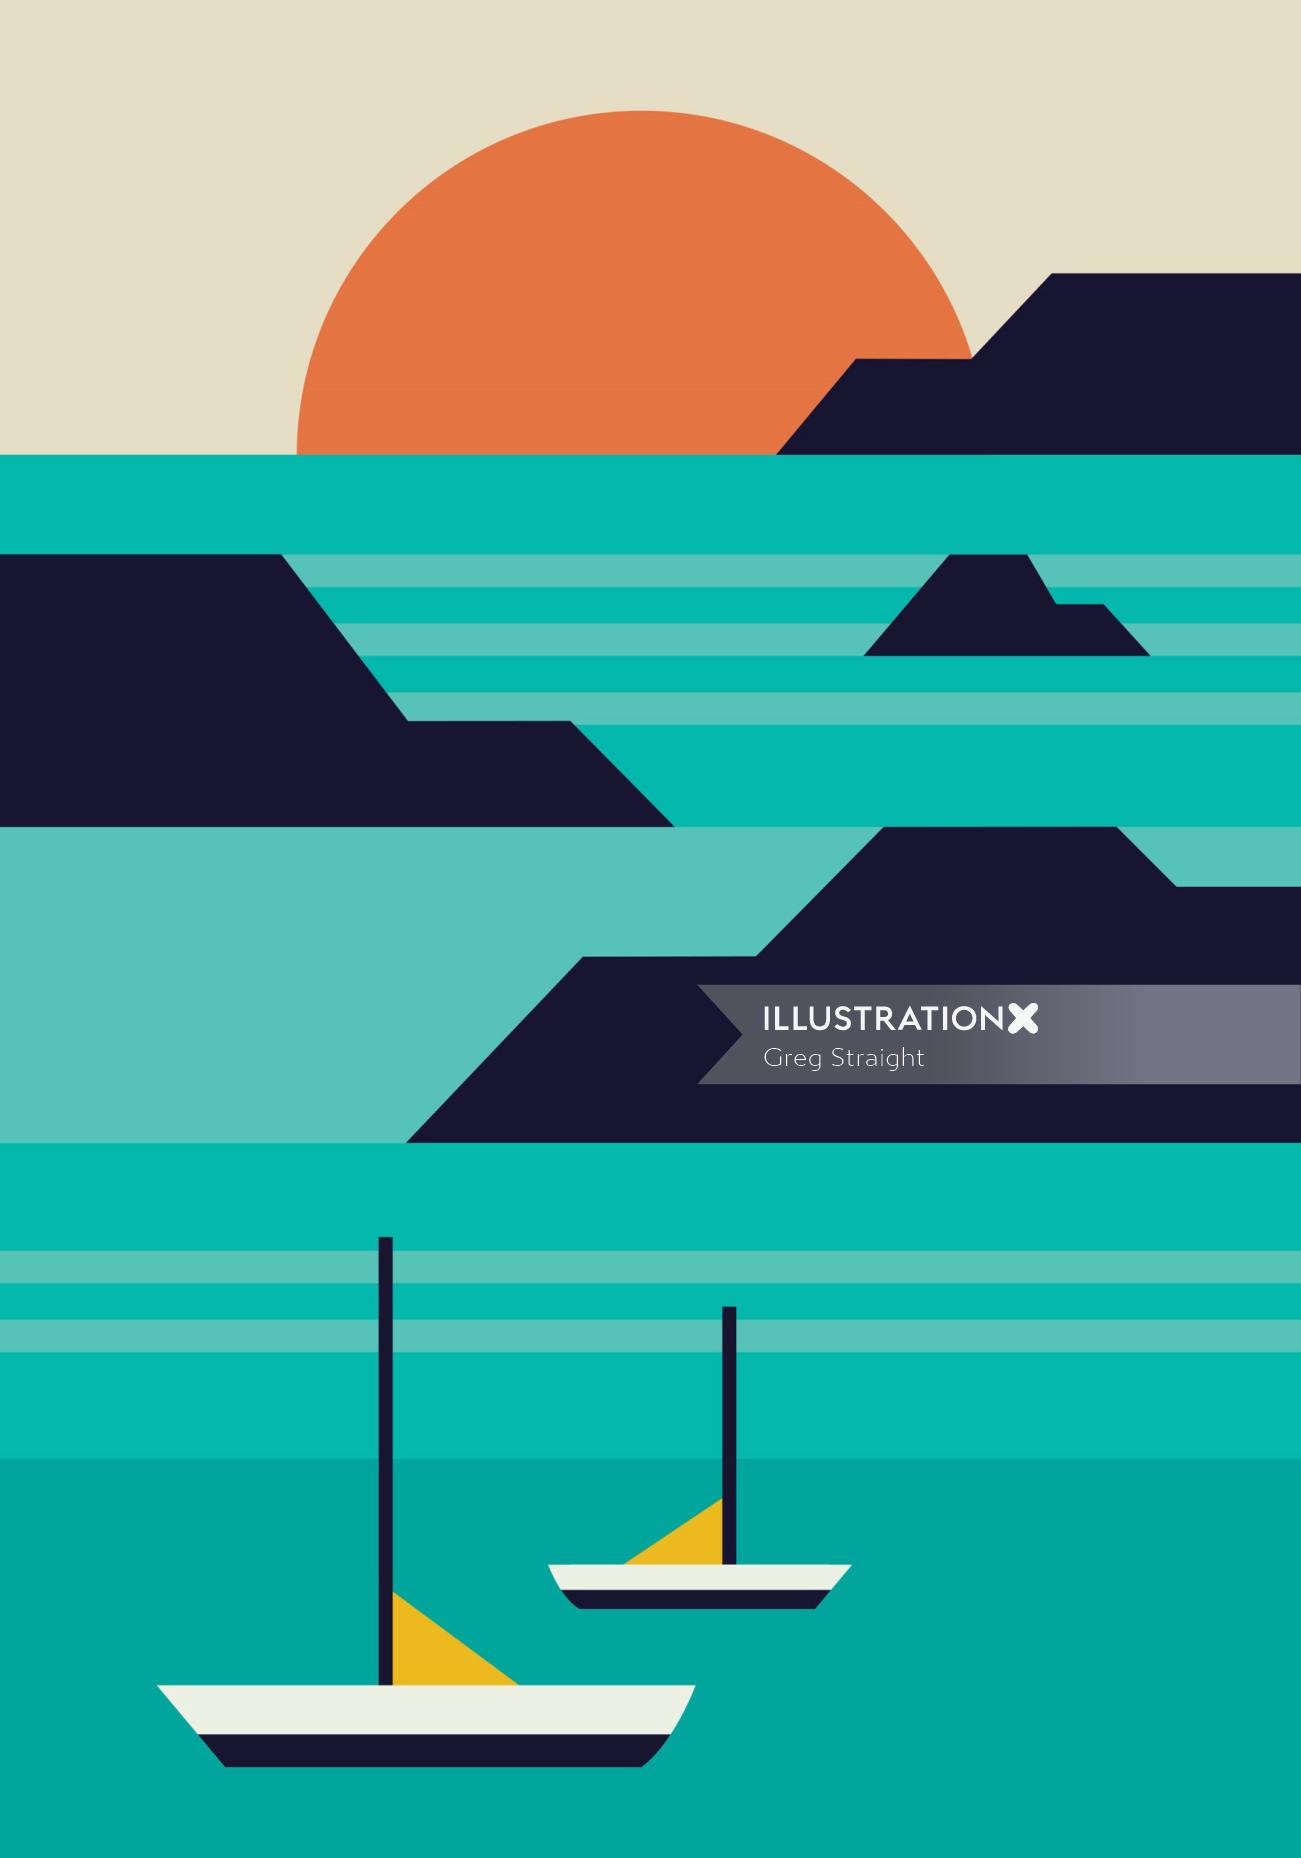 Abstract Sun, Mountains and boats illustration